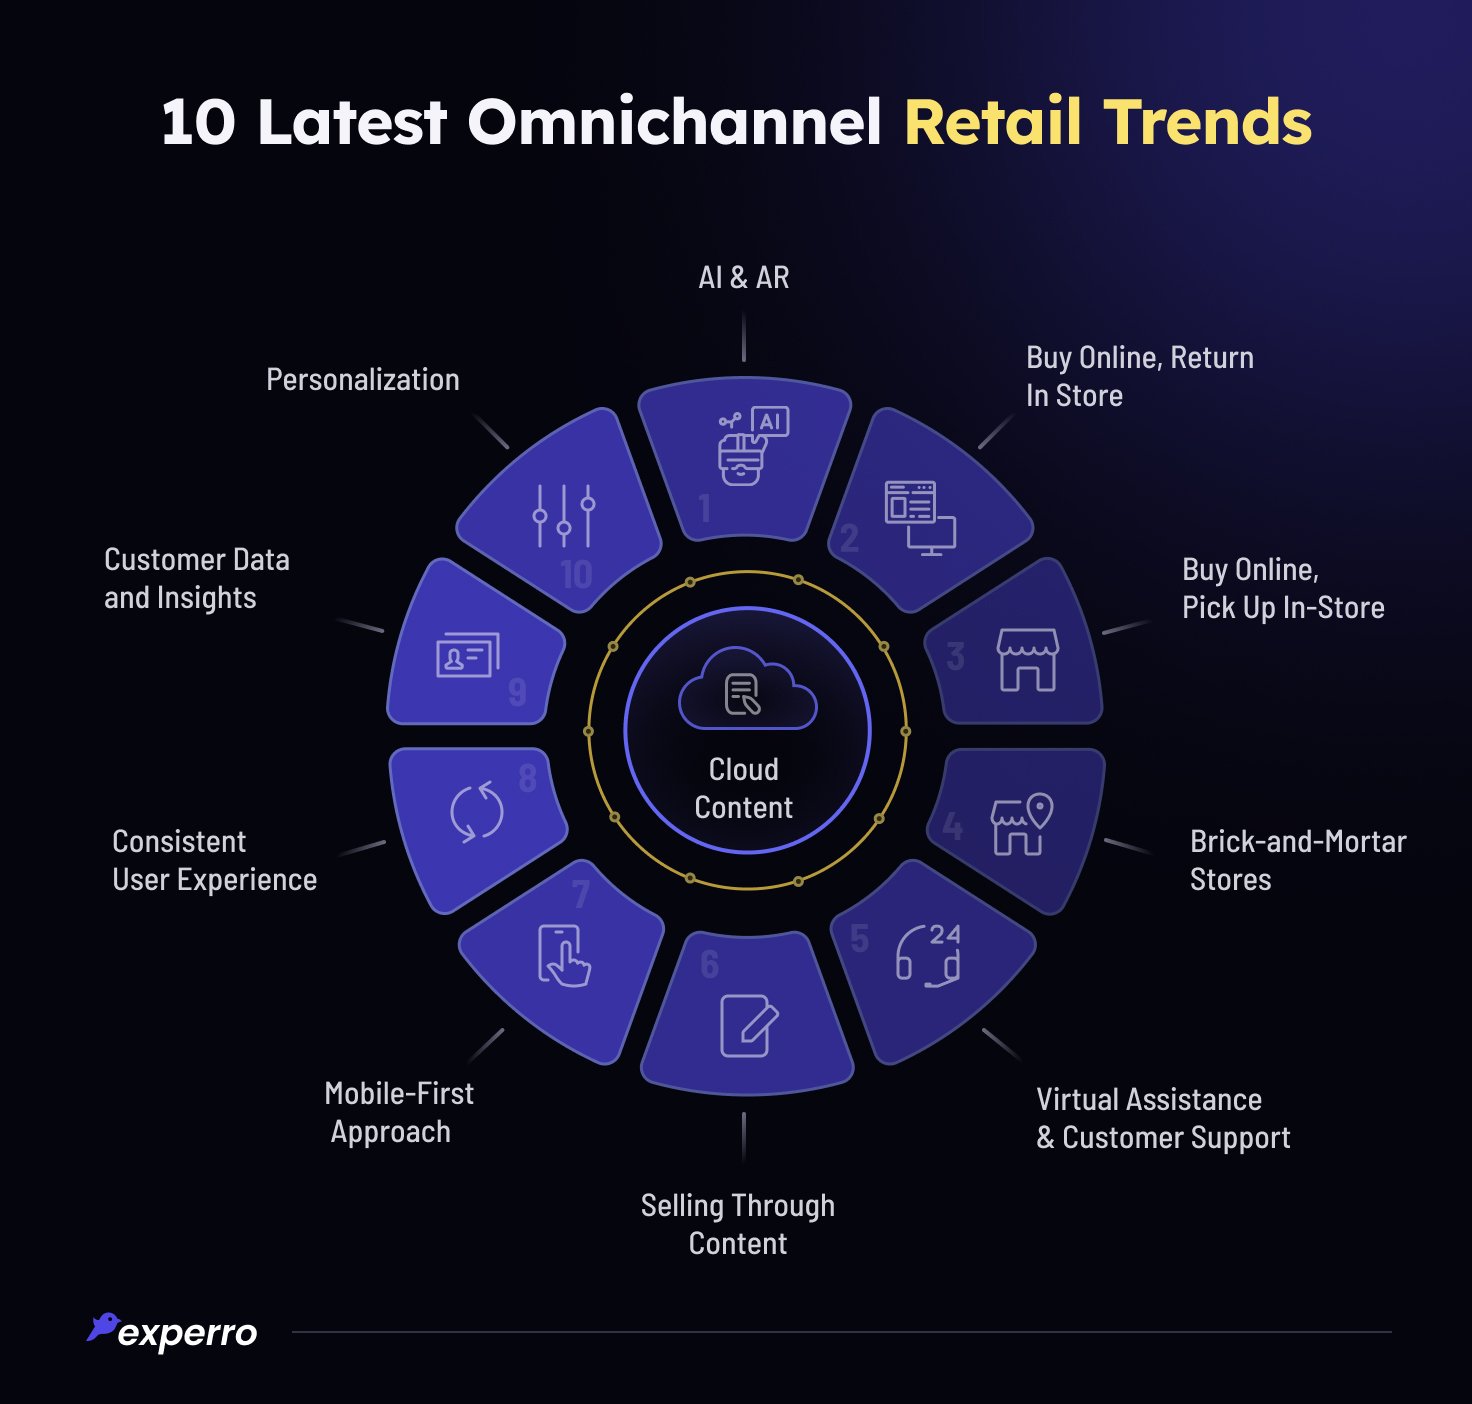 The Latest Omnichannel Retail Trends